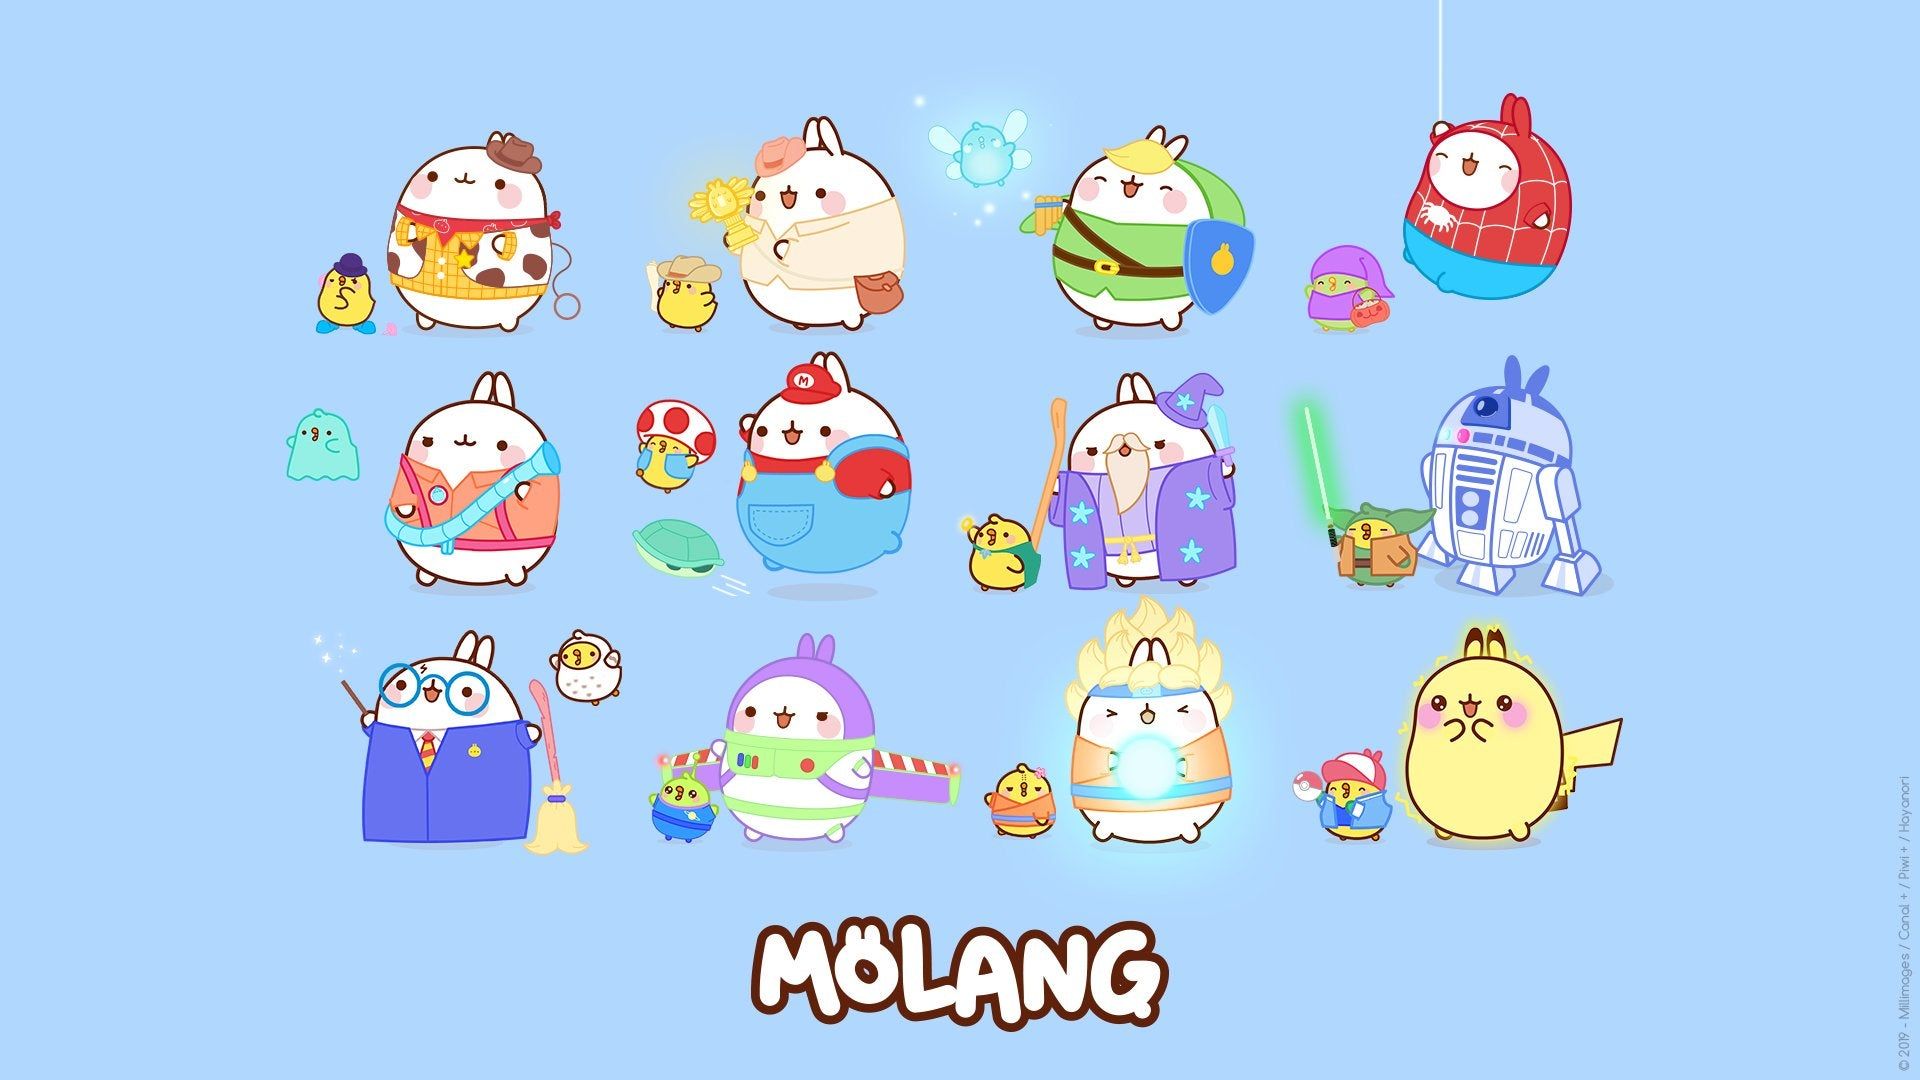 A cute collection of Molang characters in various outfits. - Molang